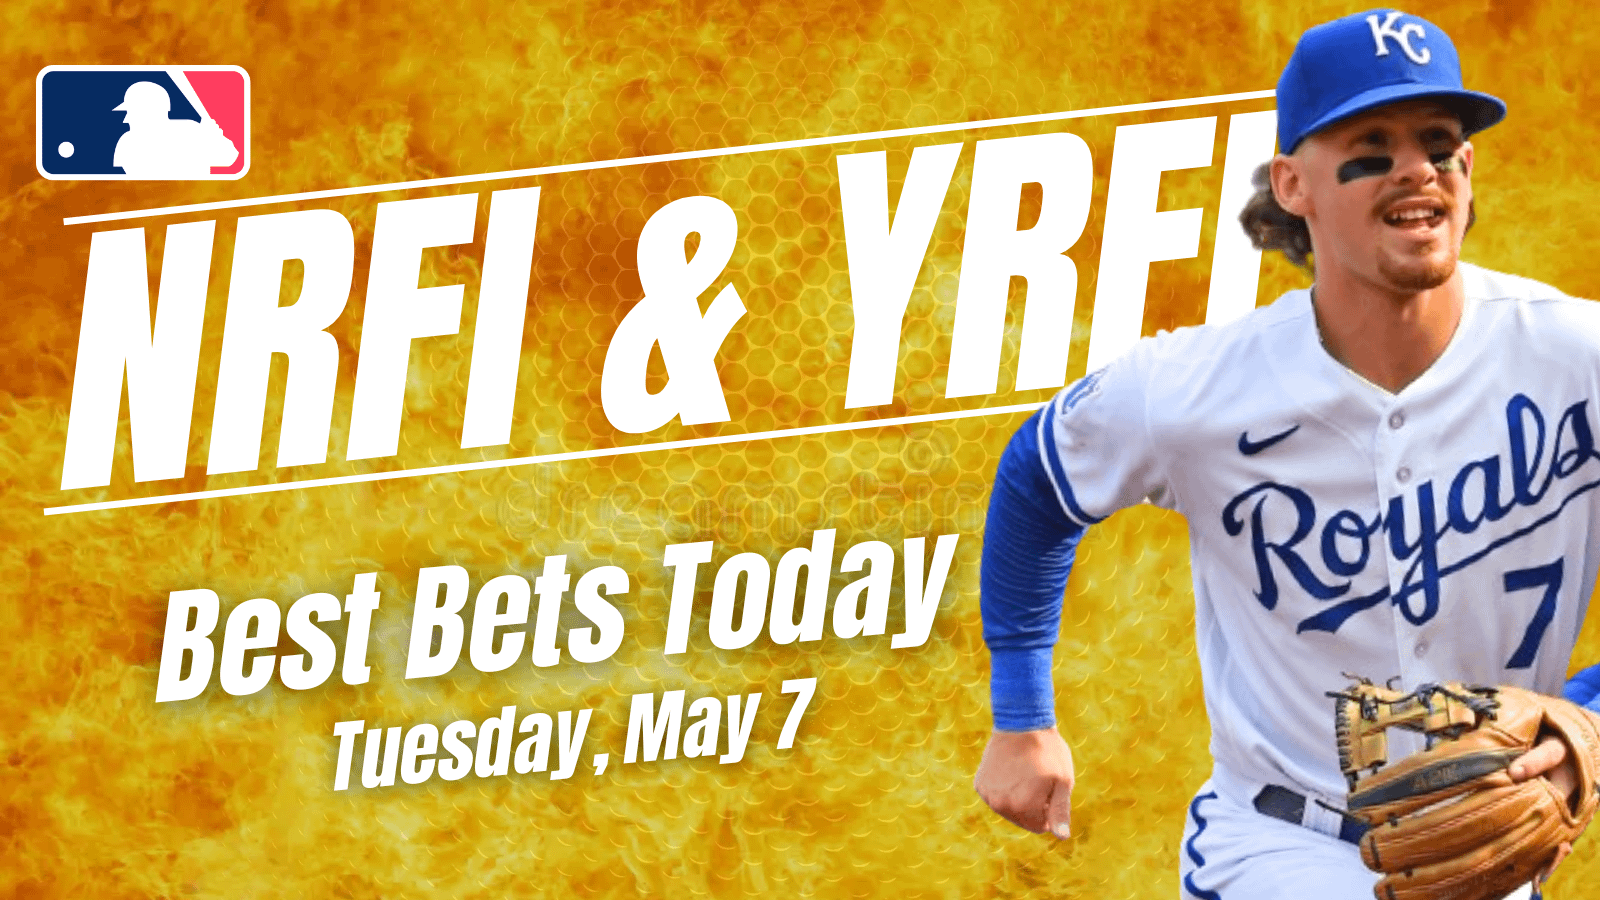 Looking for the top NRFI/YRFI bets today? We dive into the best first inning bets for Tuesday, May 7, including...